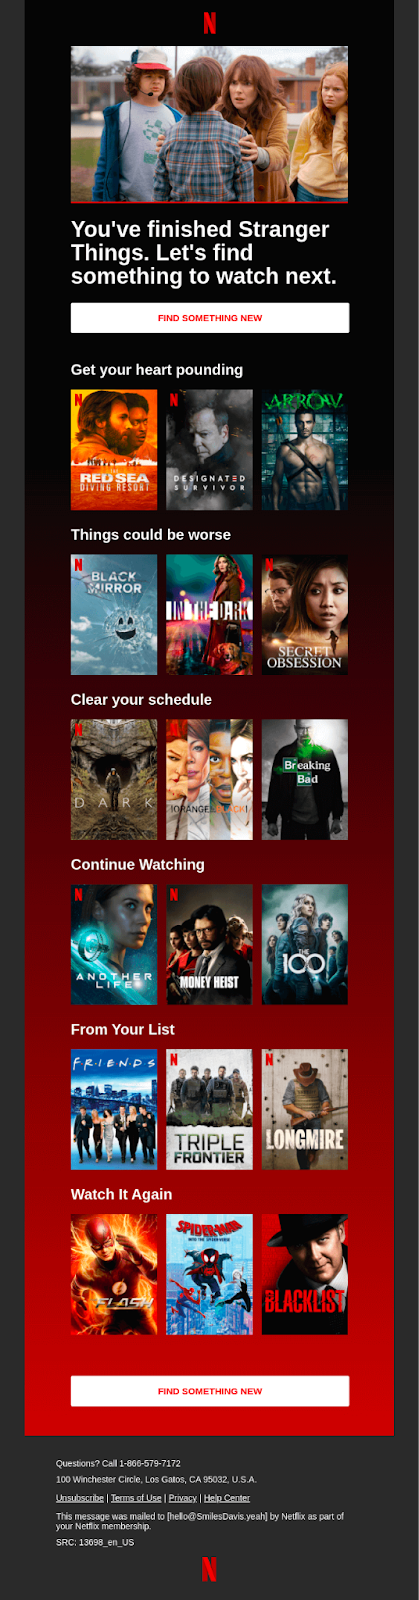 personalized marketing examples, Netflix reengagement email